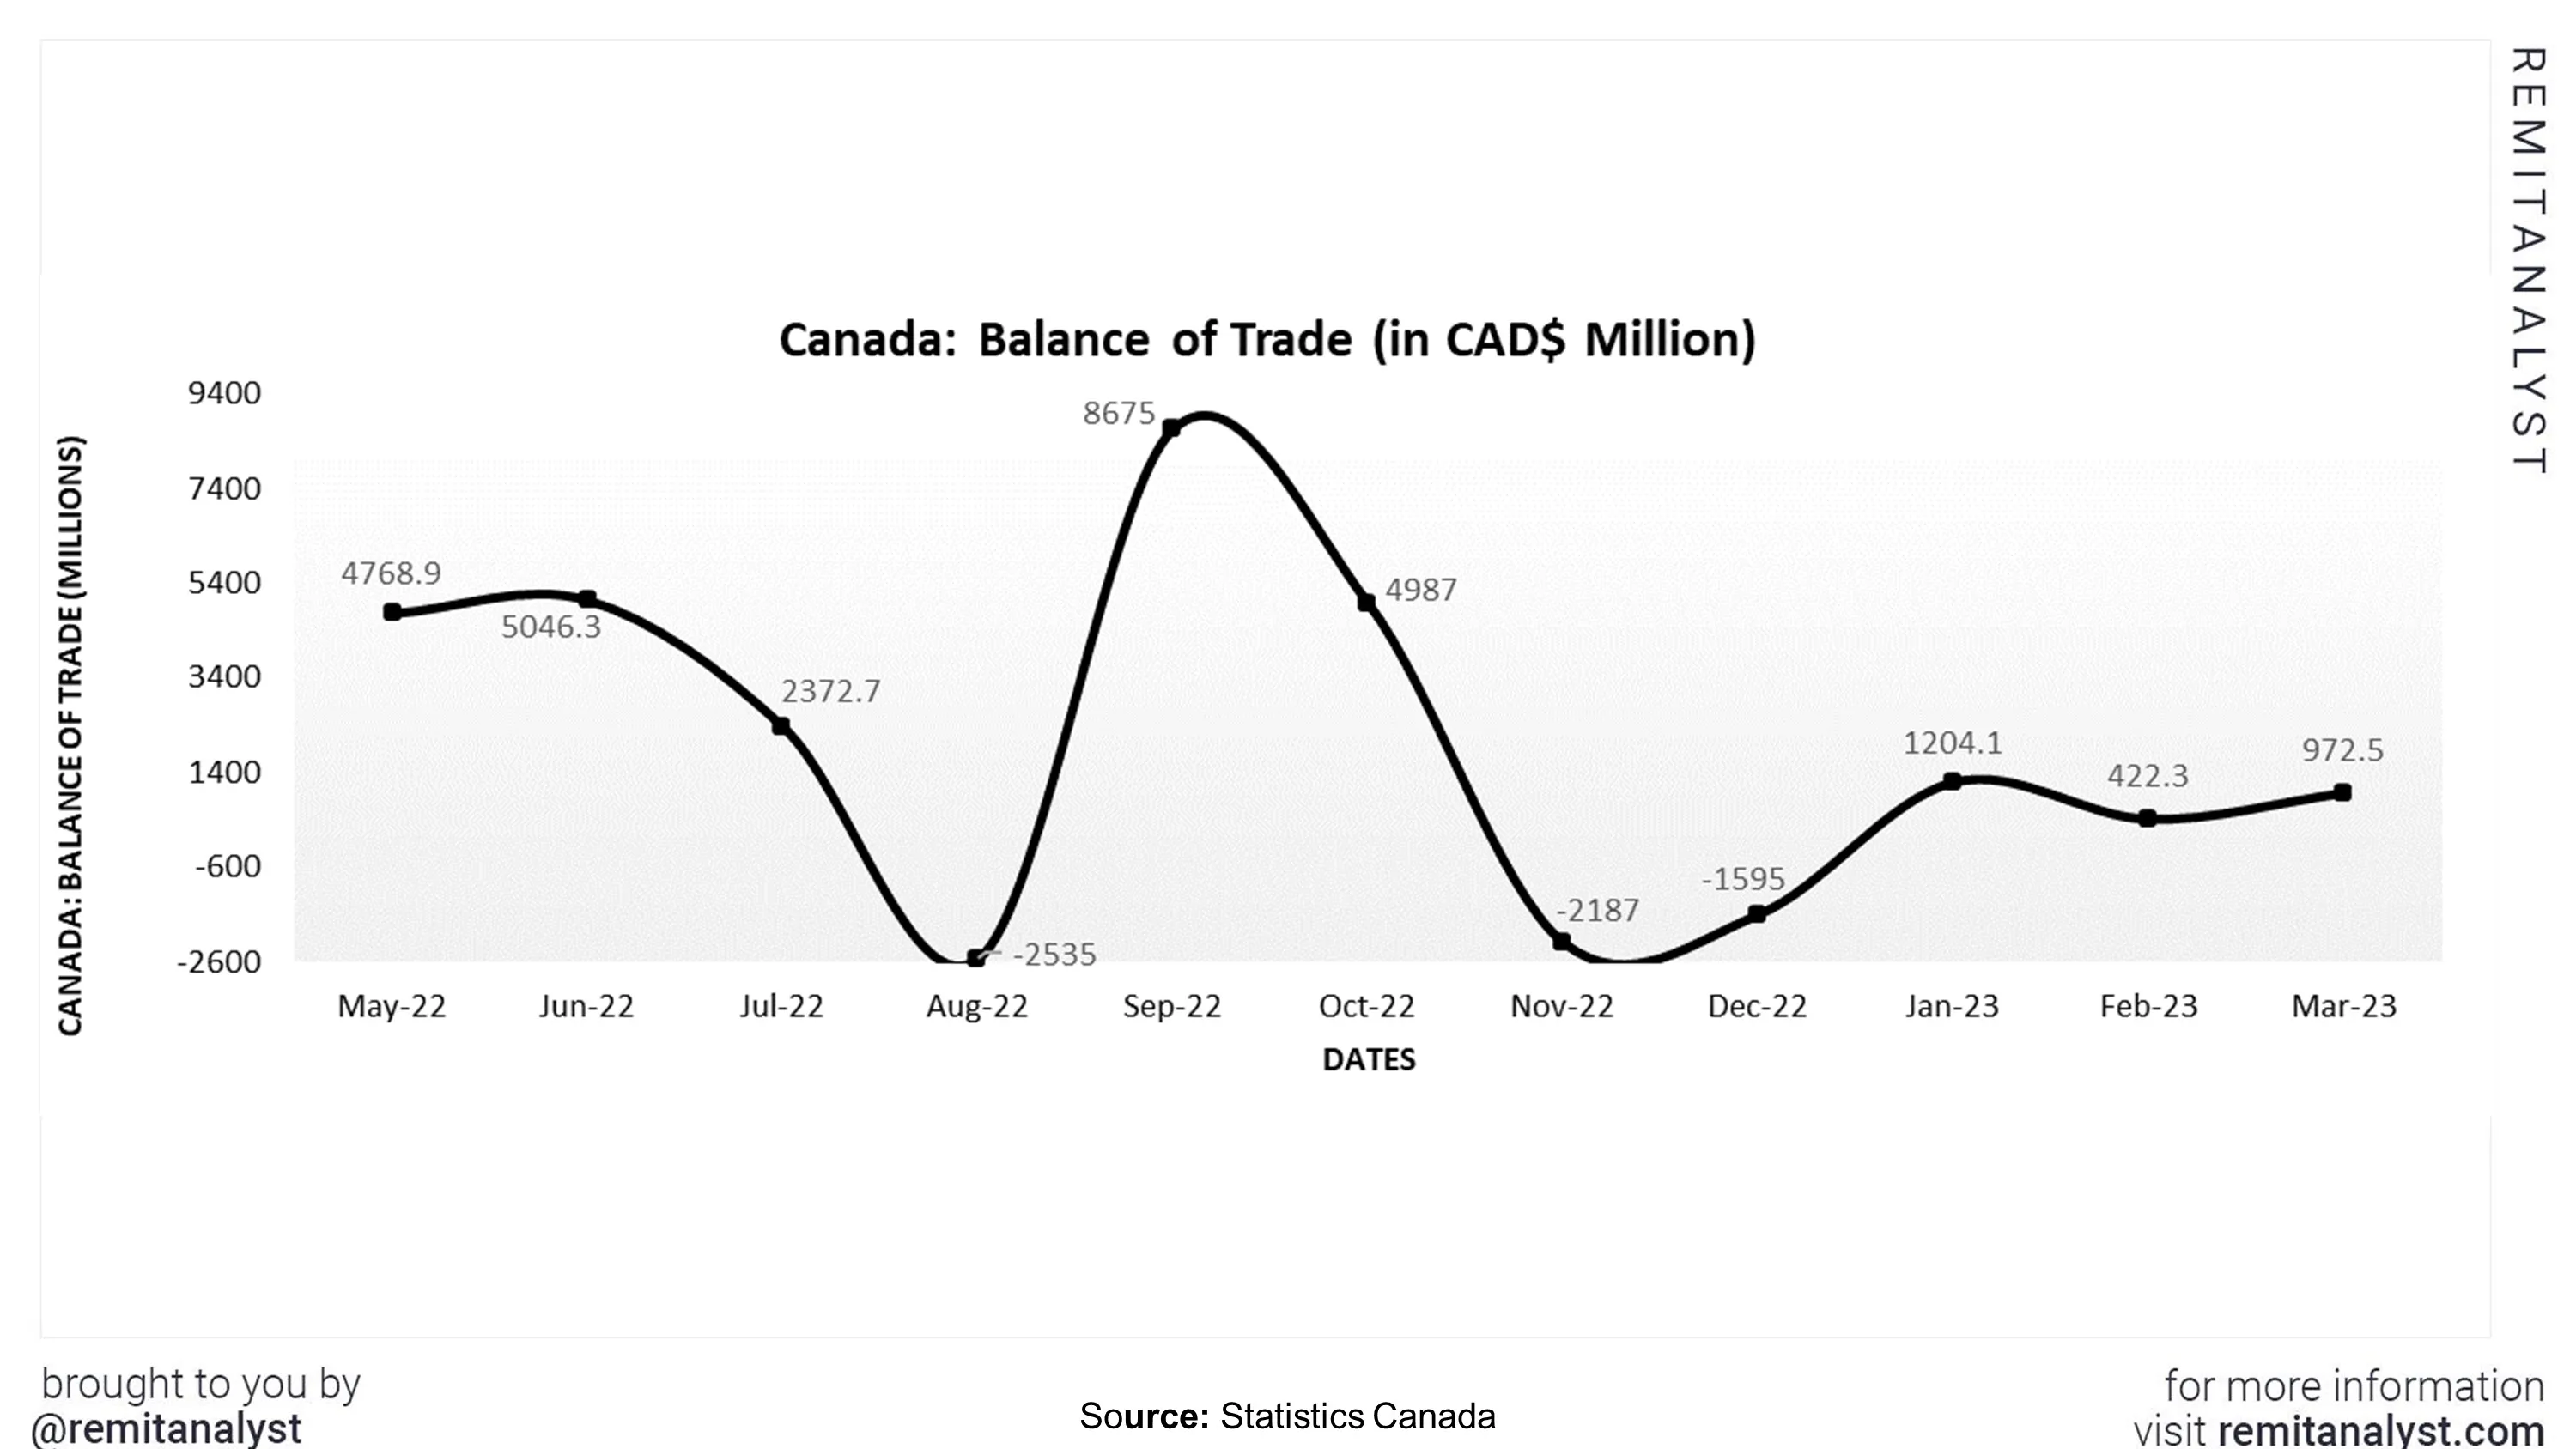 balance-of-trade-canada-from-apt-2022-to-apr-2023